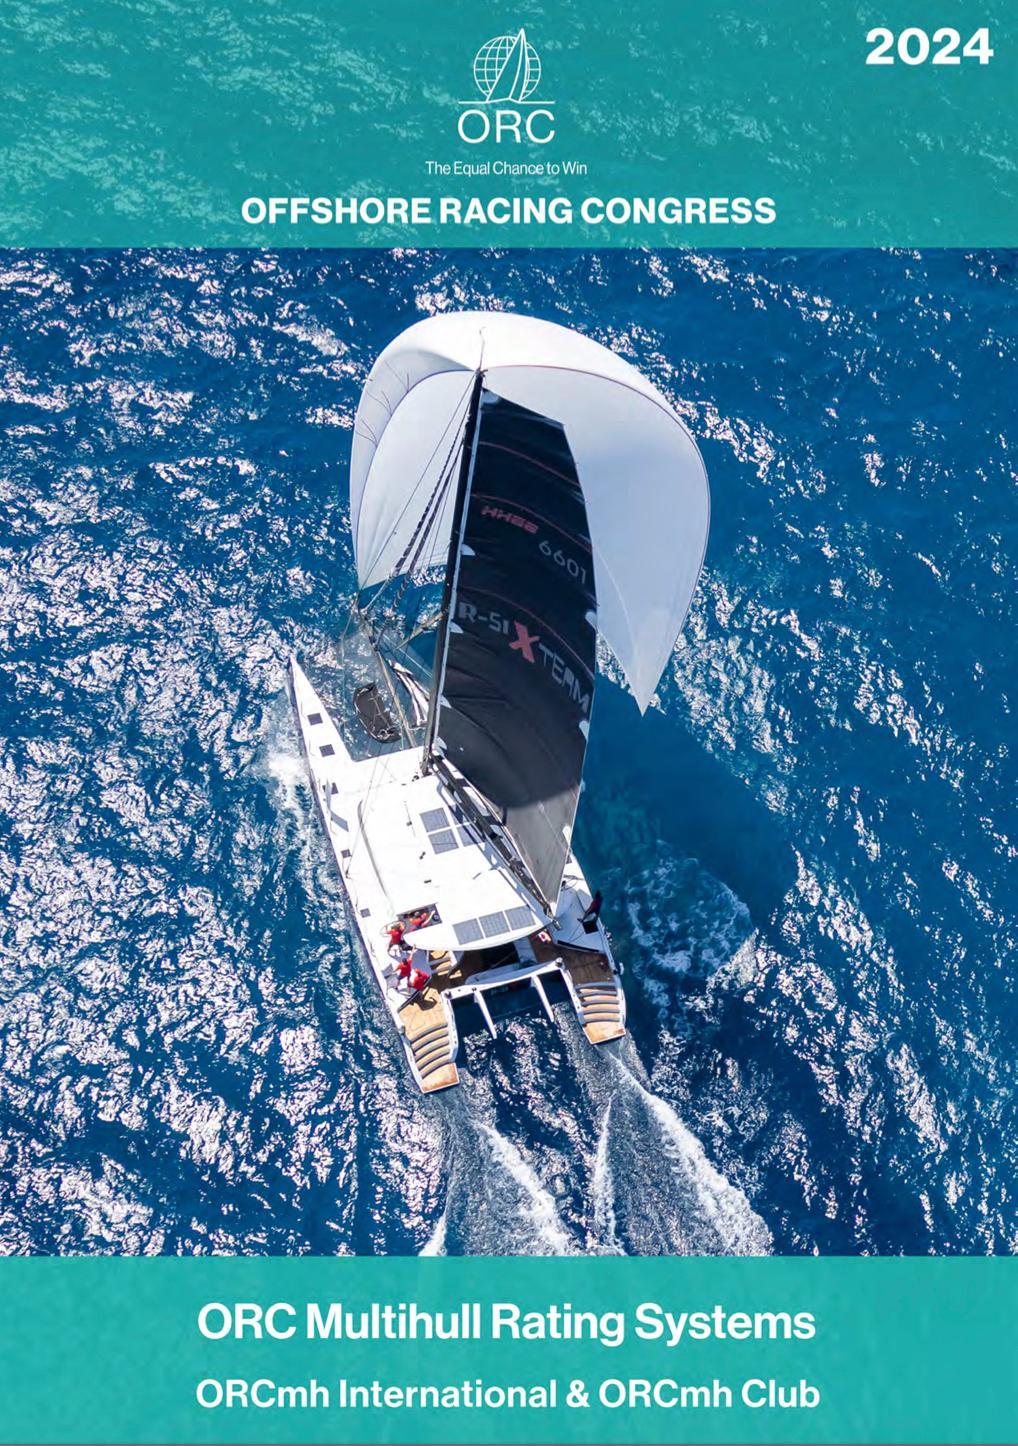 ORC Multihull Rating Systems